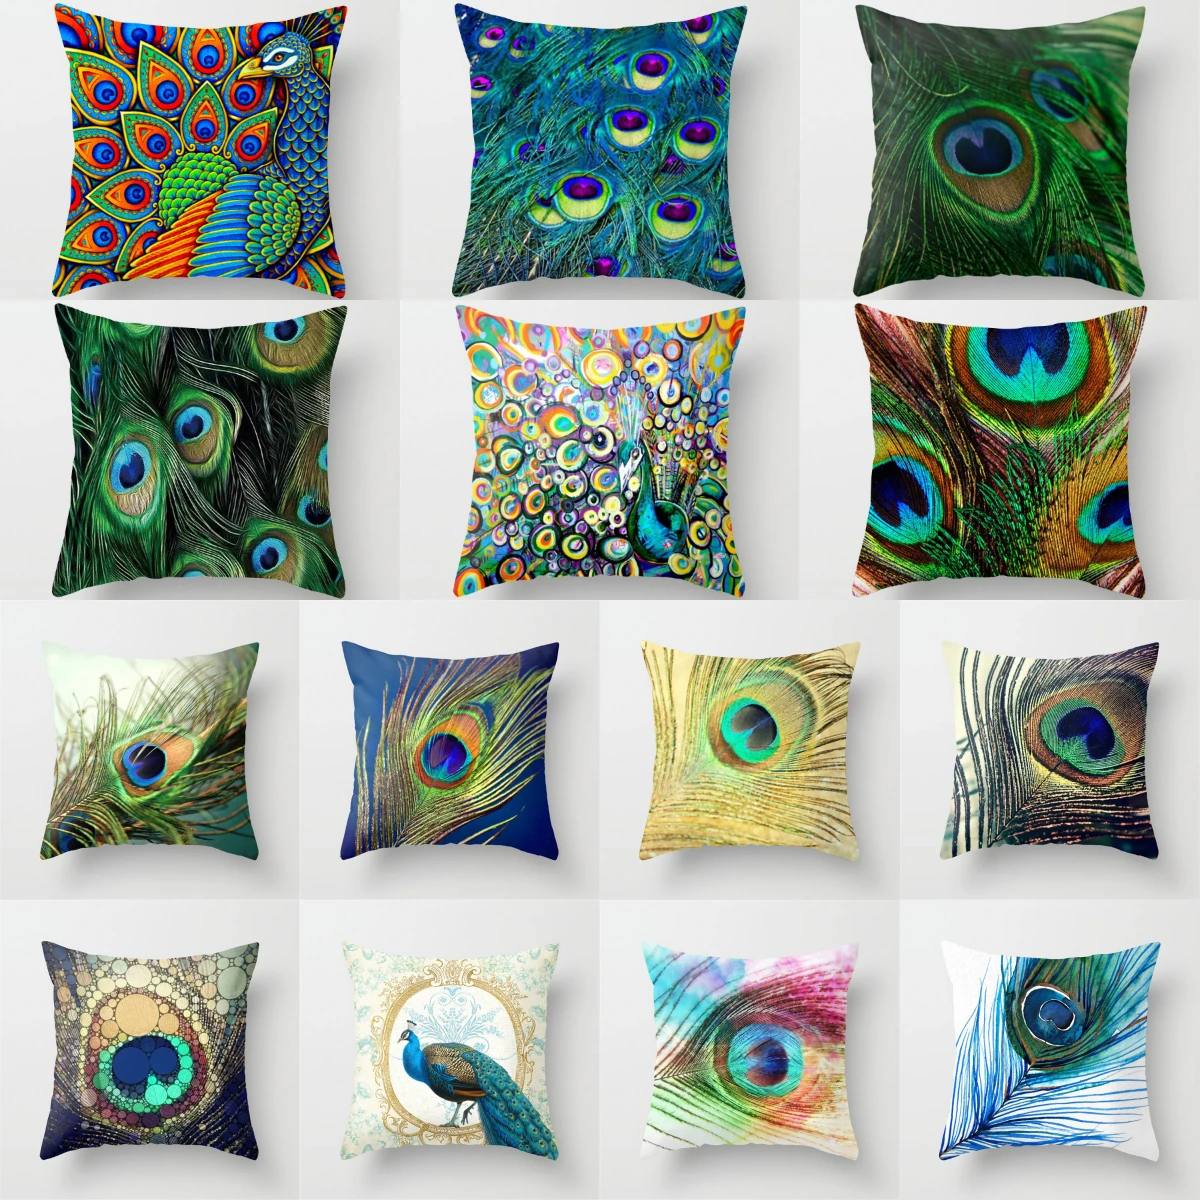 

NEW Peacock Feathers Cushion Cover Polyester Peacock Pillow Covers For Home Decoration 45X45CM Sofa/Car Throw Pillows Decorative